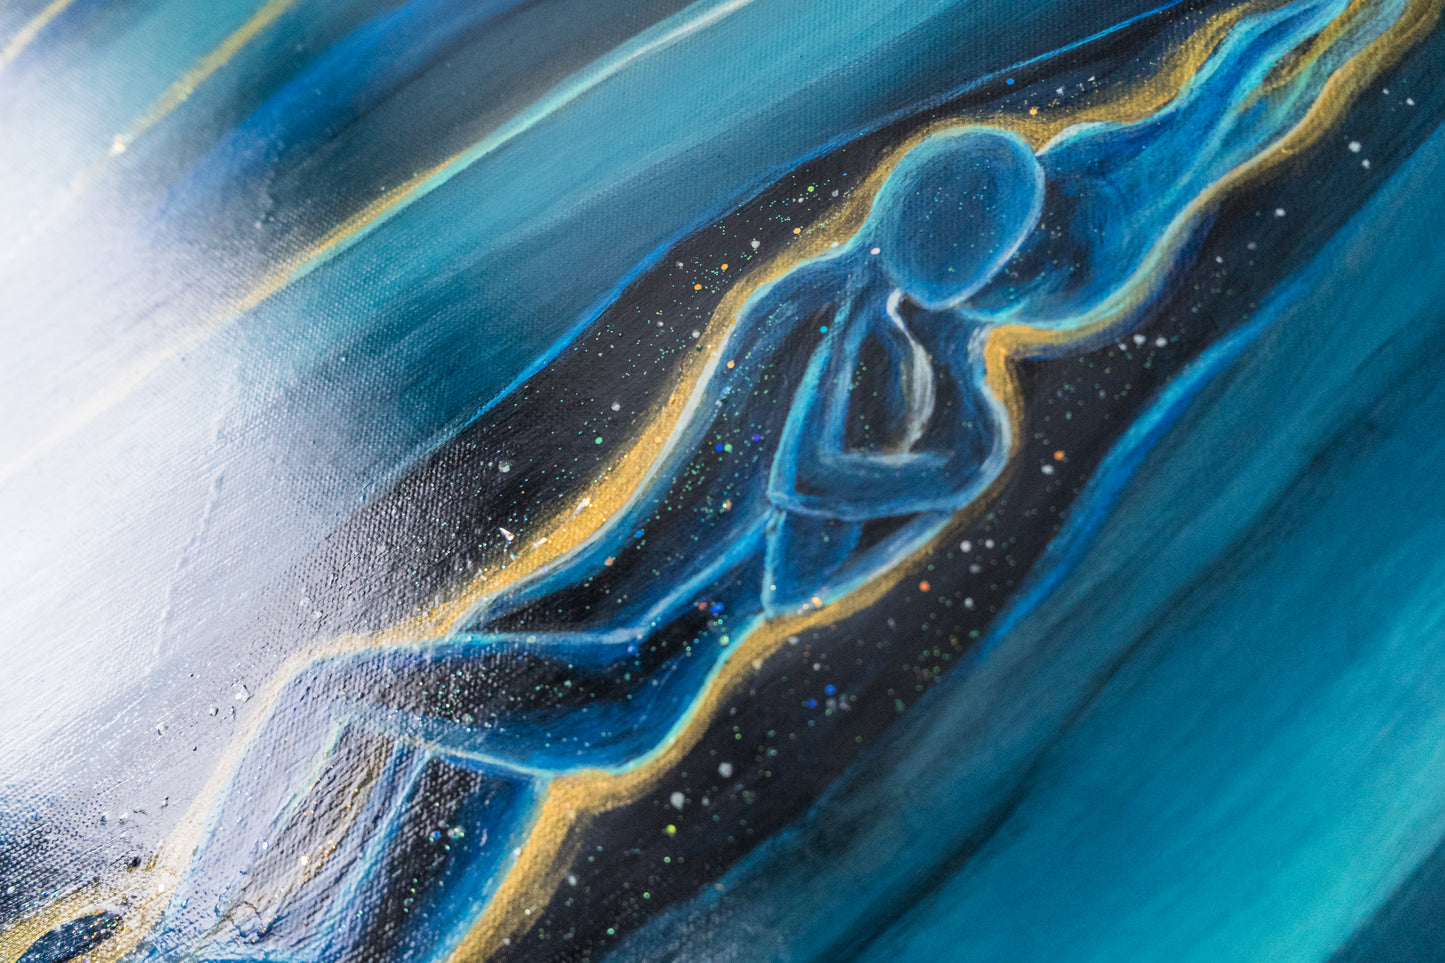 Closeup Glitter from Romantic Couple Floating in Space - Original glow in the dark painting on recycled canvas, Romantic and gives good vibes, yin-yang, Soulmate, Twin Flames Art